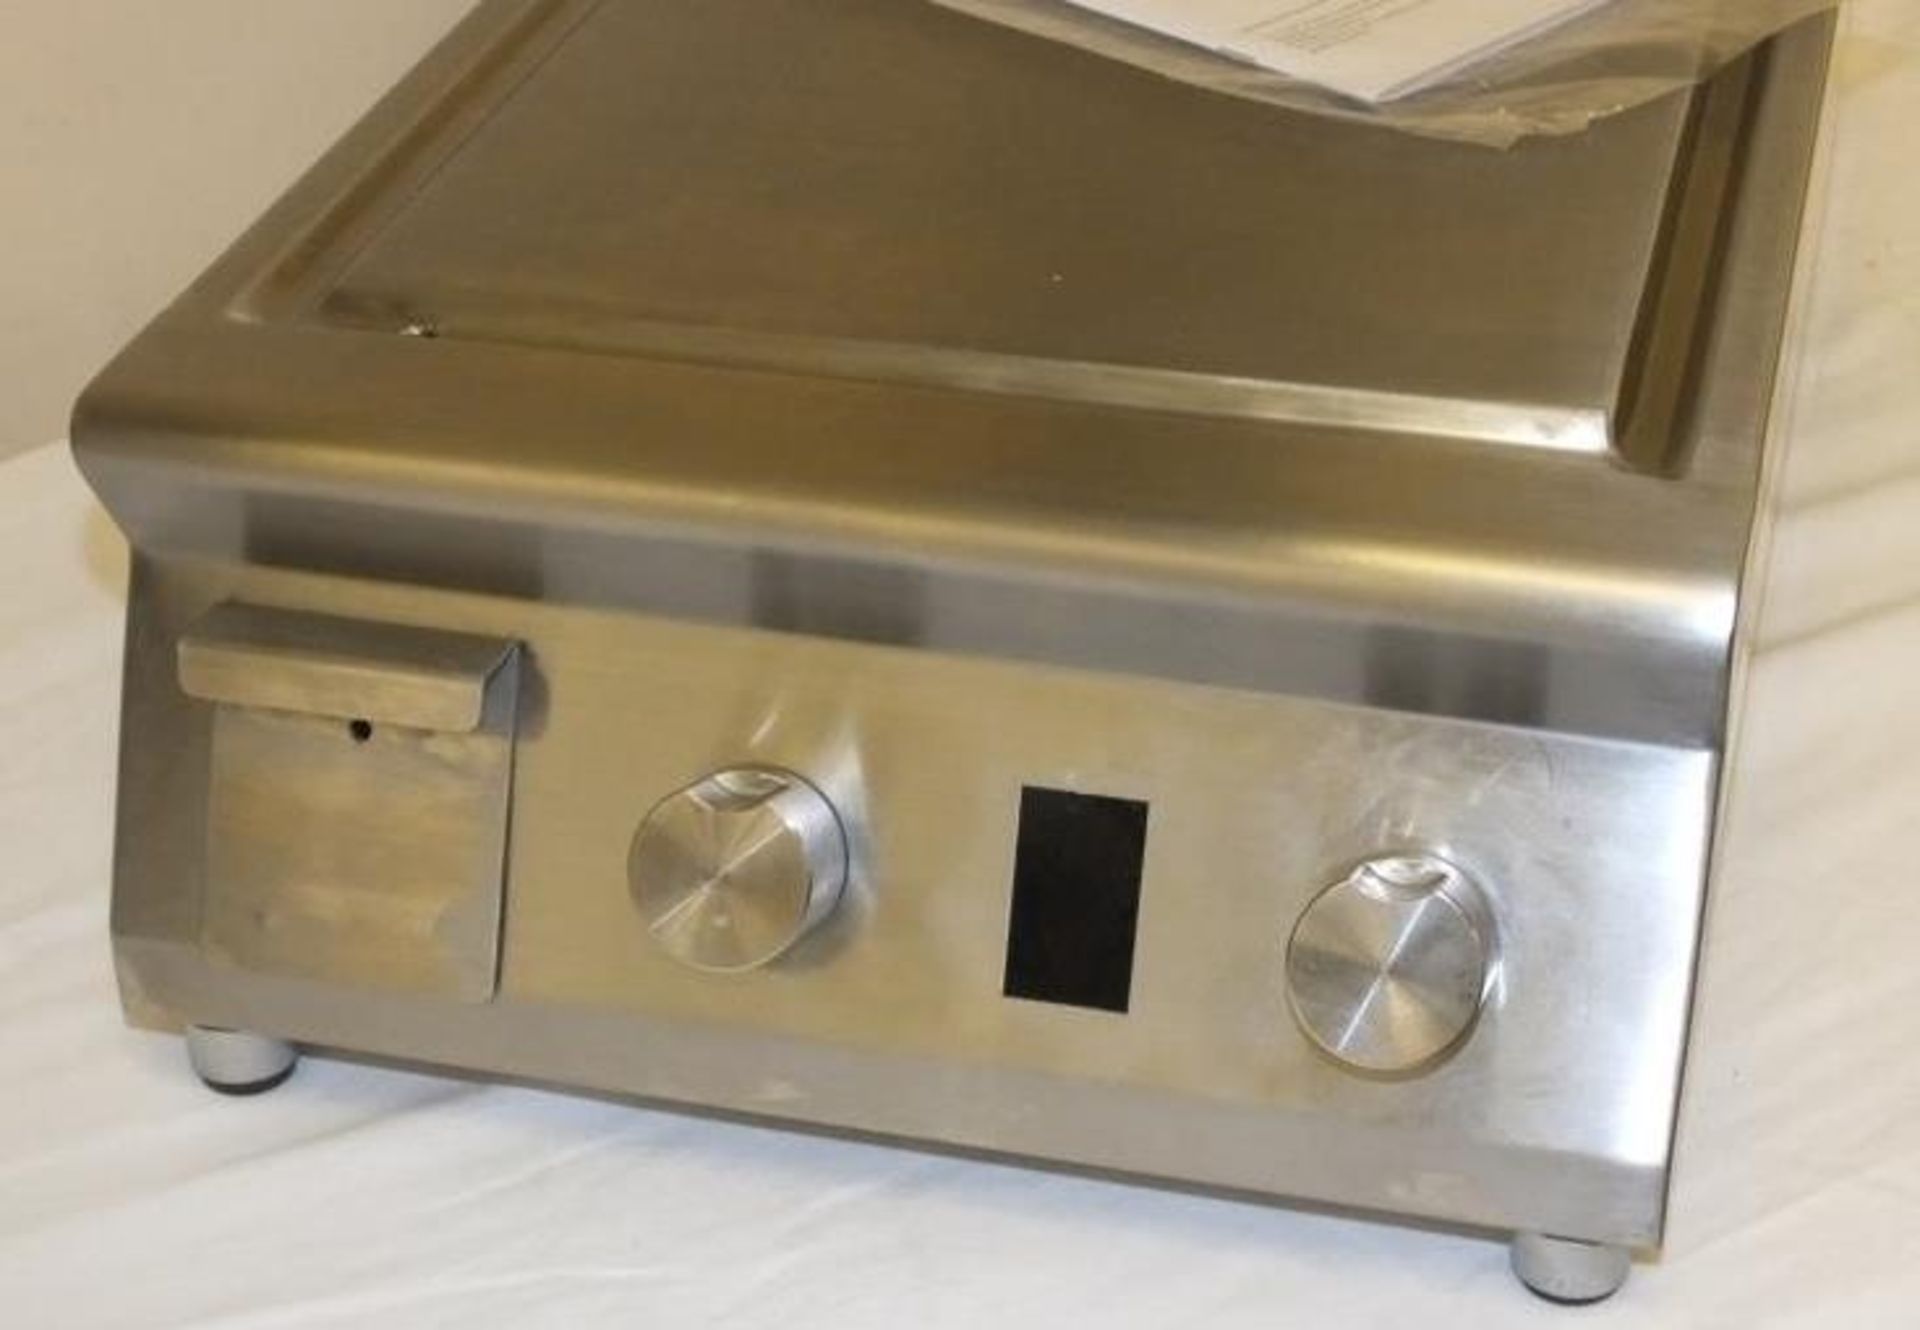 Rexmartins Model RMBSTIFT35 SemiPro Induction Teppanyaki, 70x45x24cm, New & Boxed - Image 3 of 3